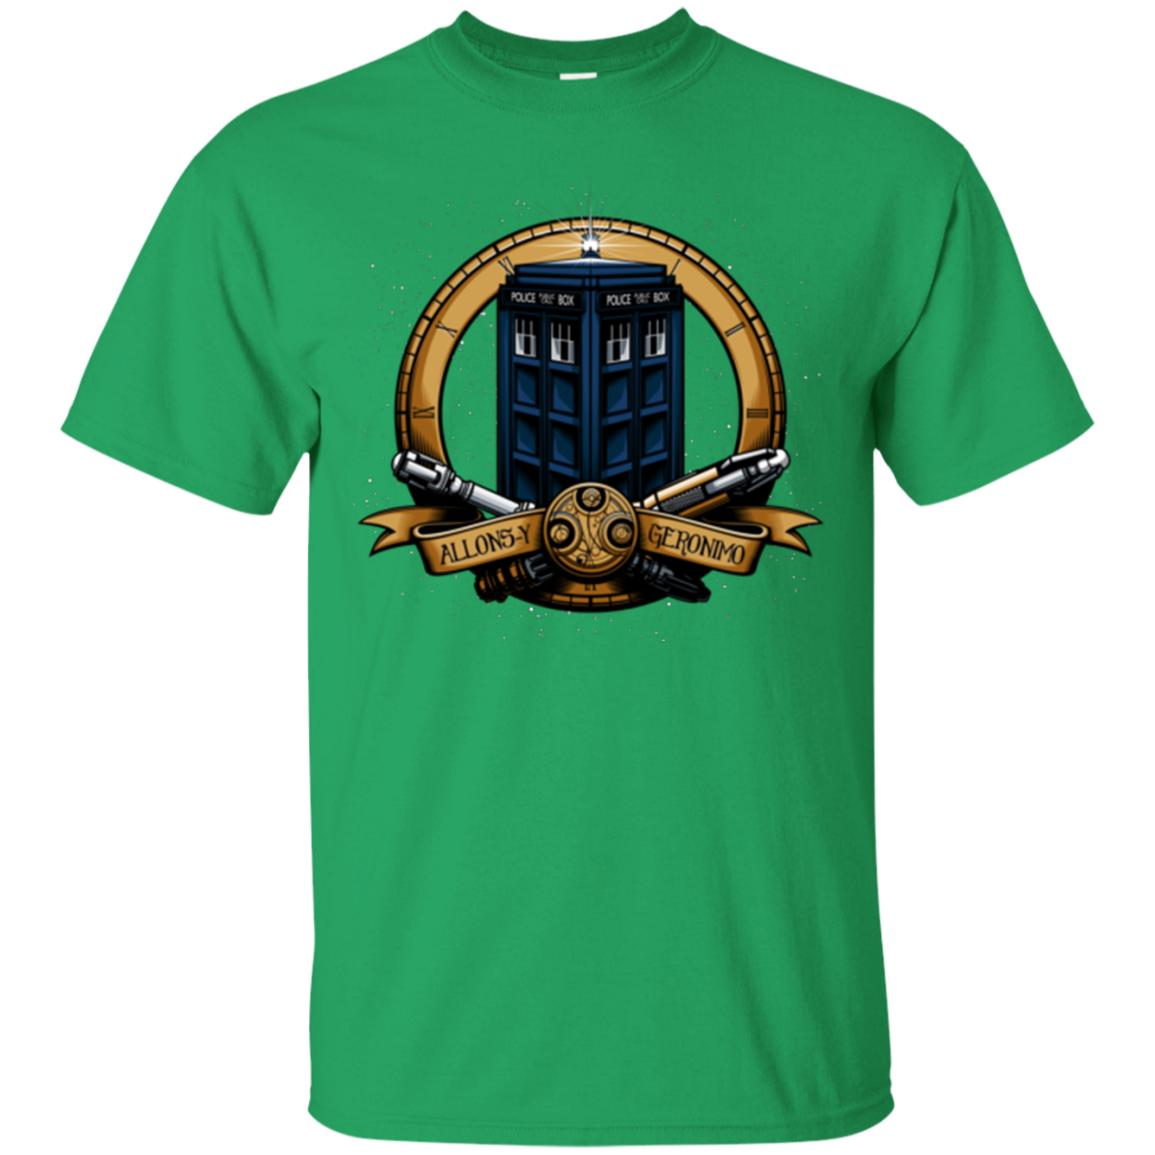 The Day of the Doctor T-Shirt